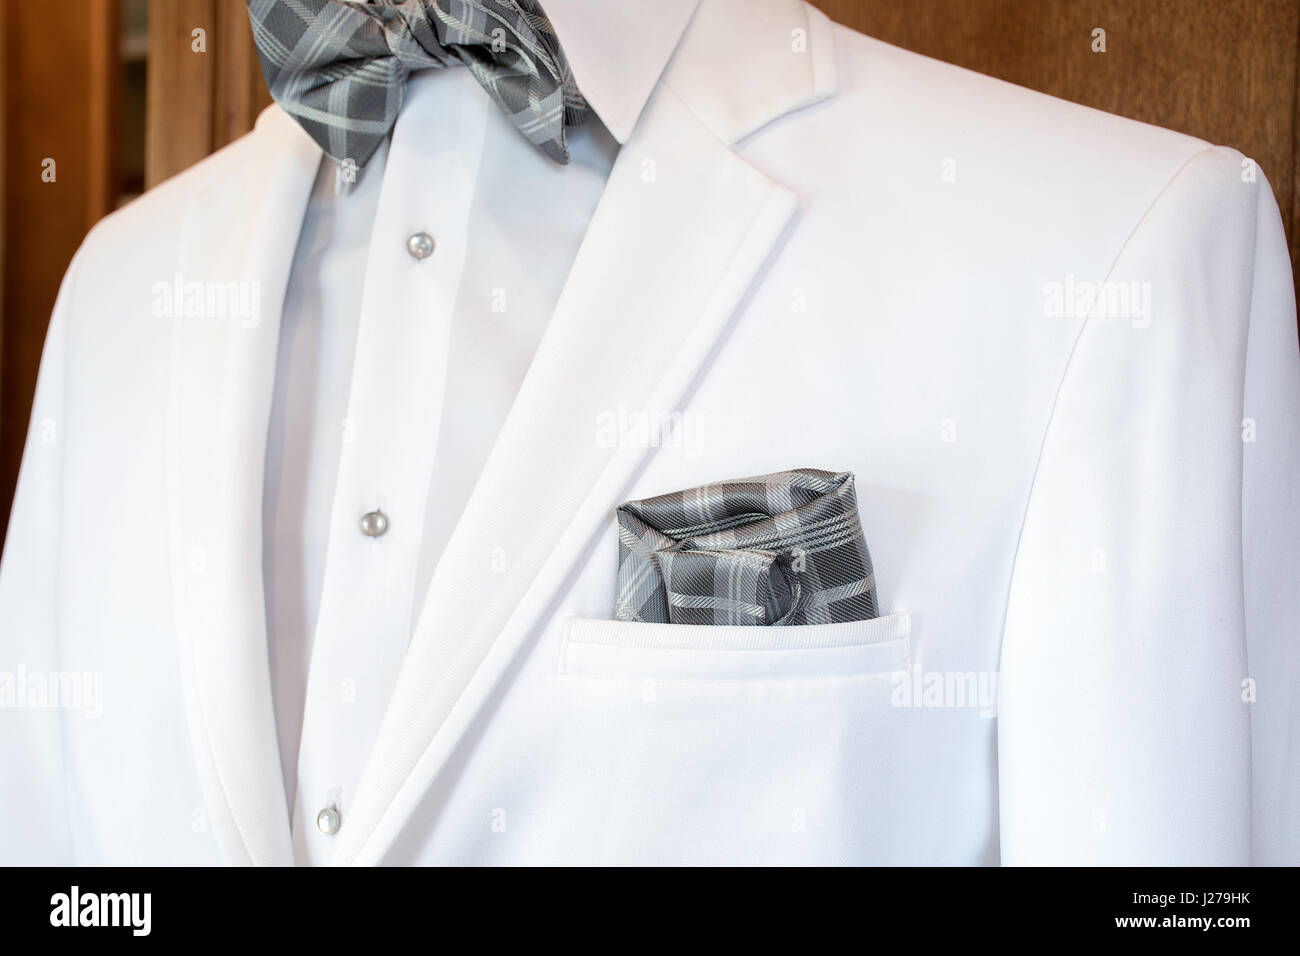 white tuxedo with silver gray plaid bow tie and handkerchief in pocket Stock Photo